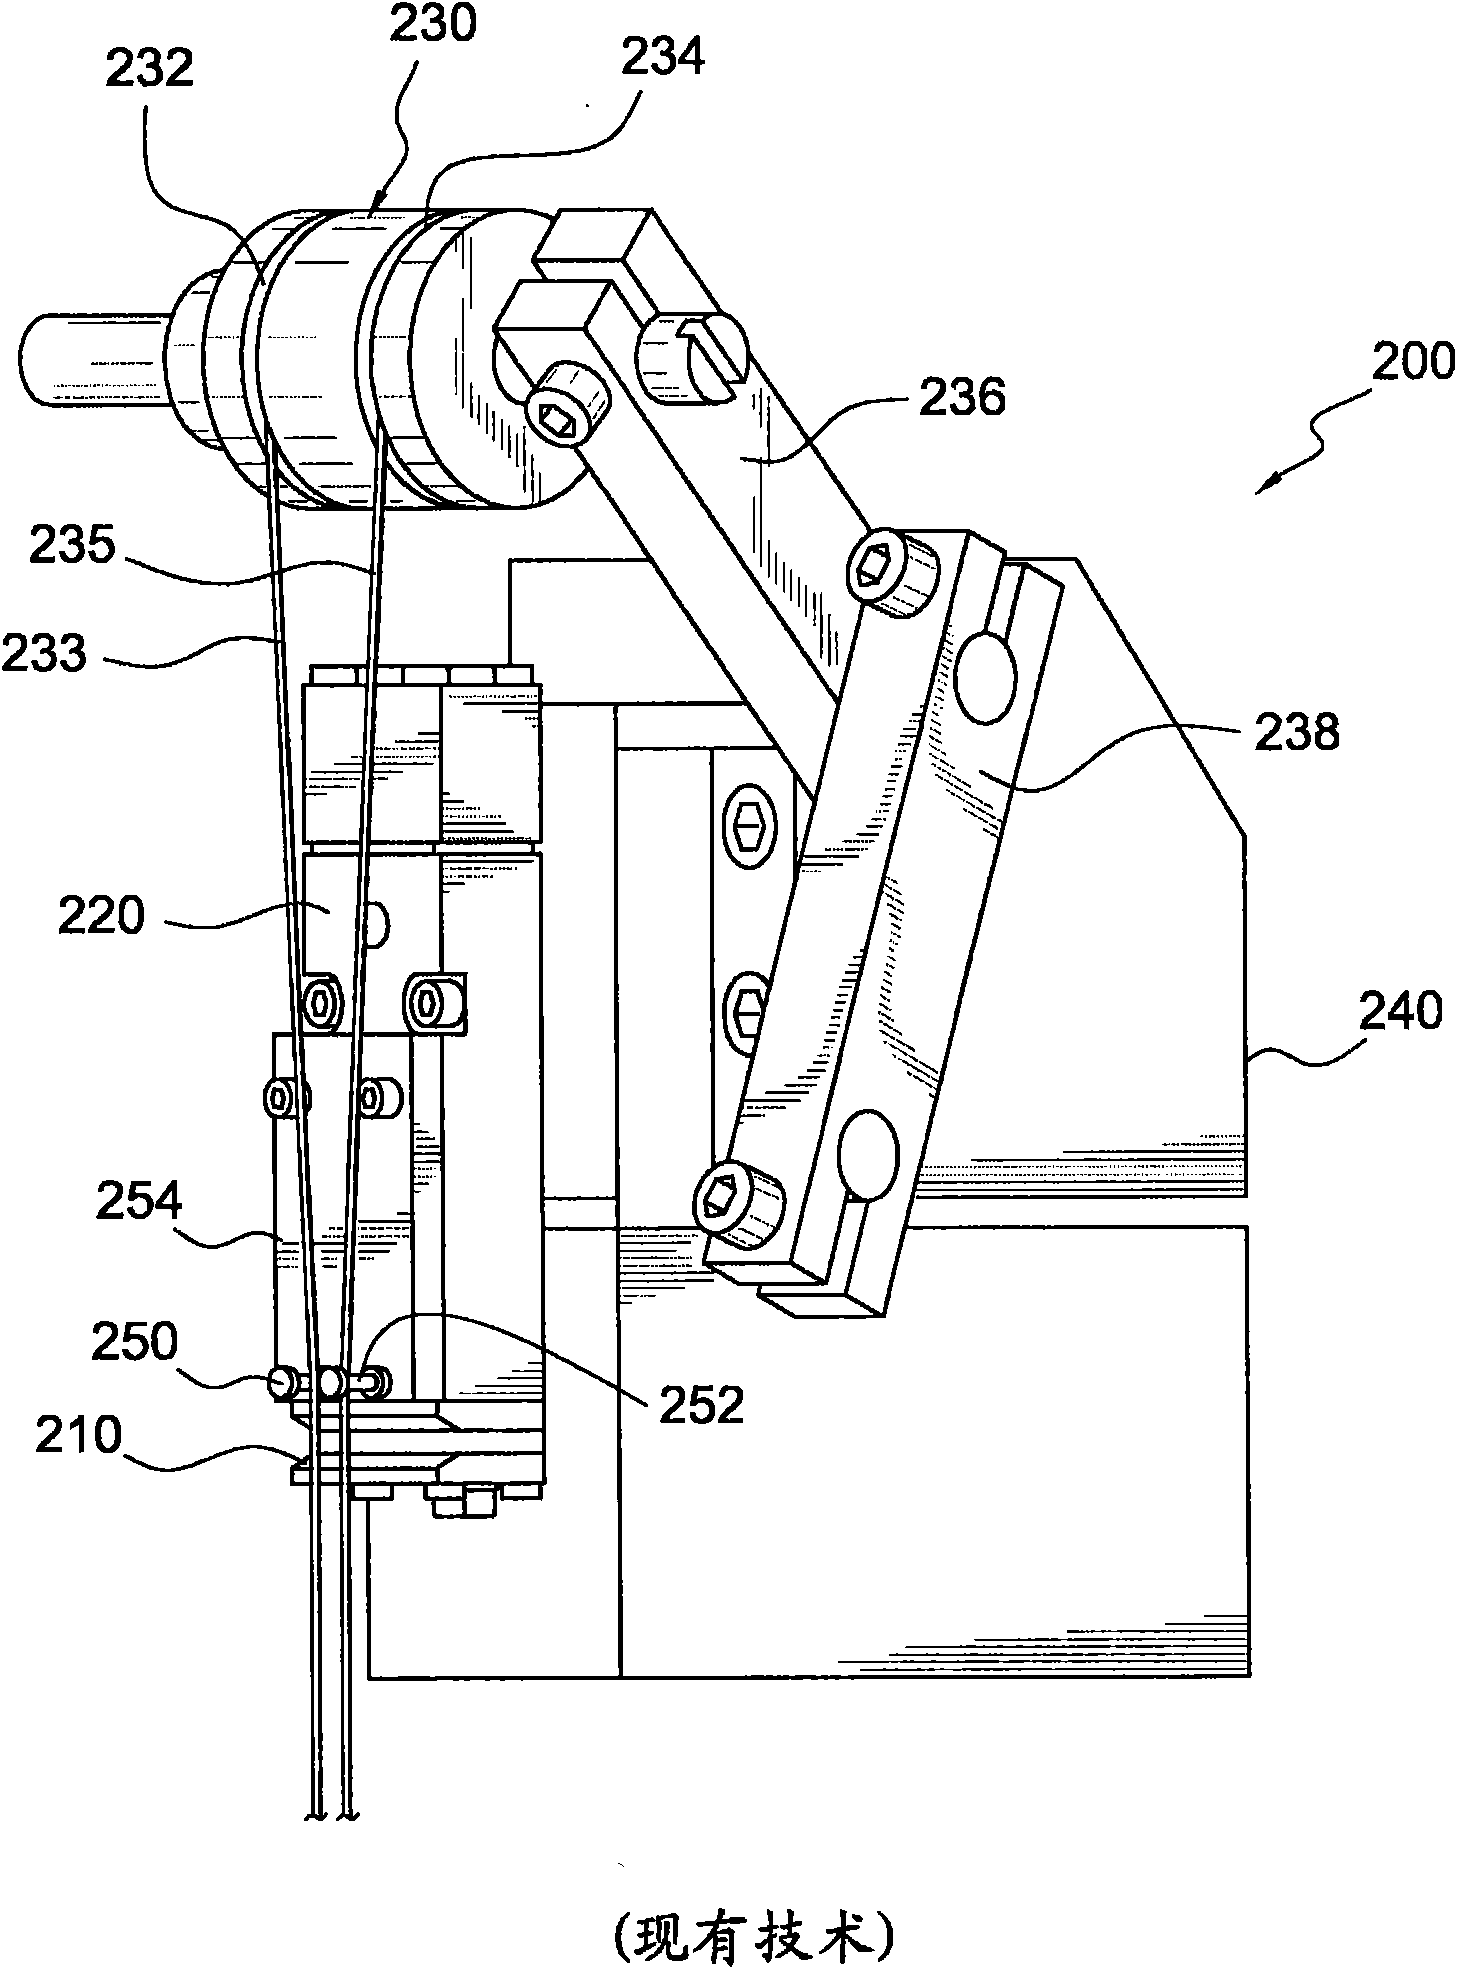 Strand positioning guide having reversely oriented v-shaped slots for use in connection with strand coating applicators